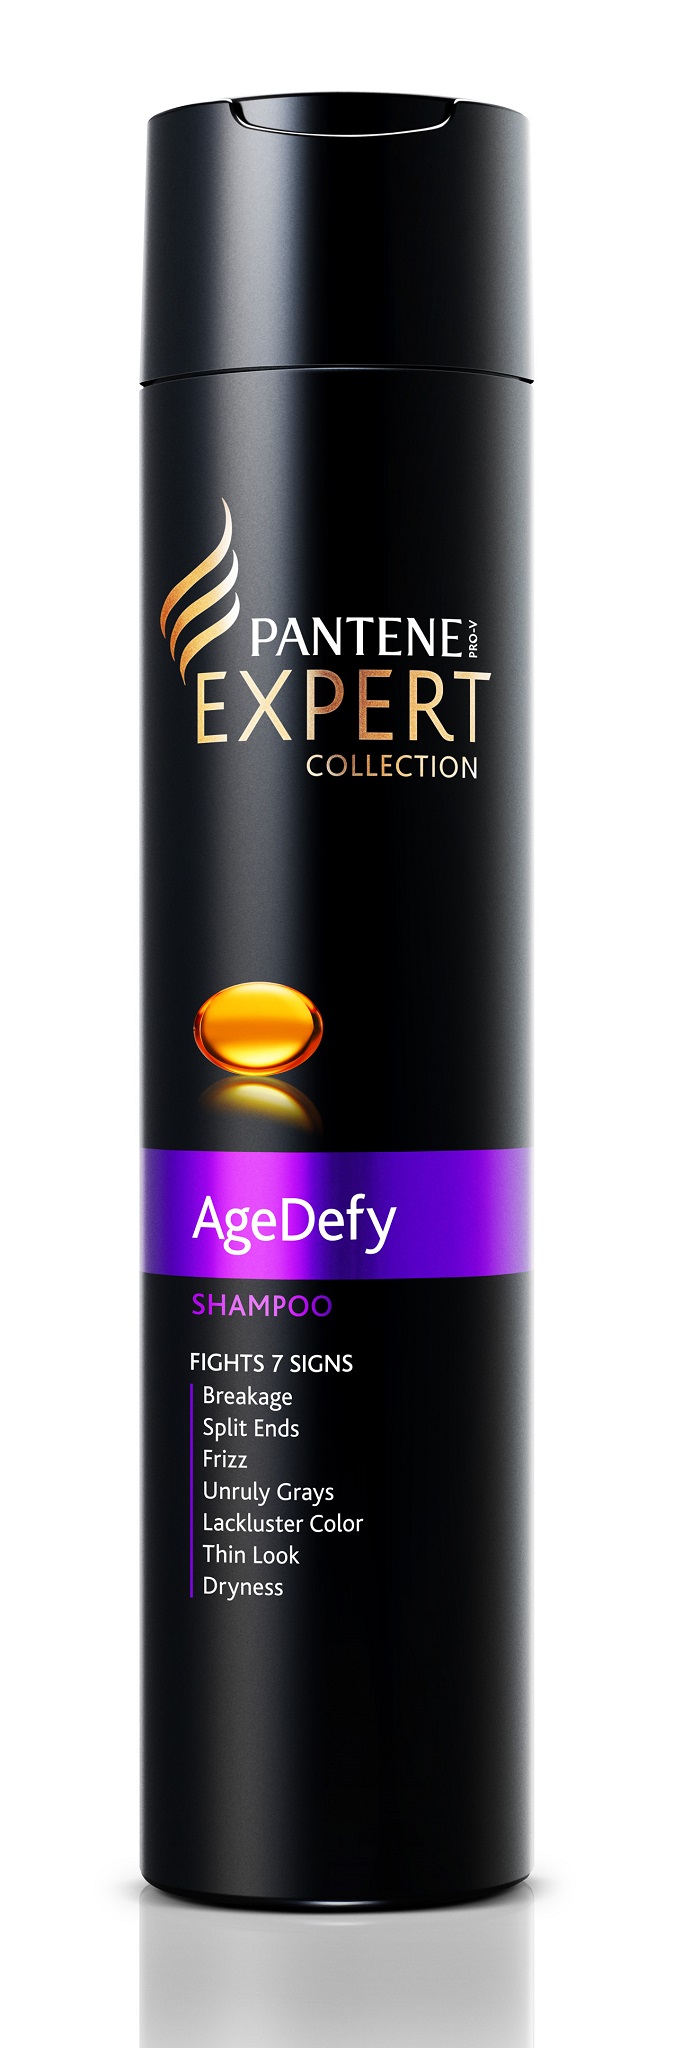 Pantene-Expert-Collection-Age-Defy-Shampoo_white.jpg  by BudgetGeneral